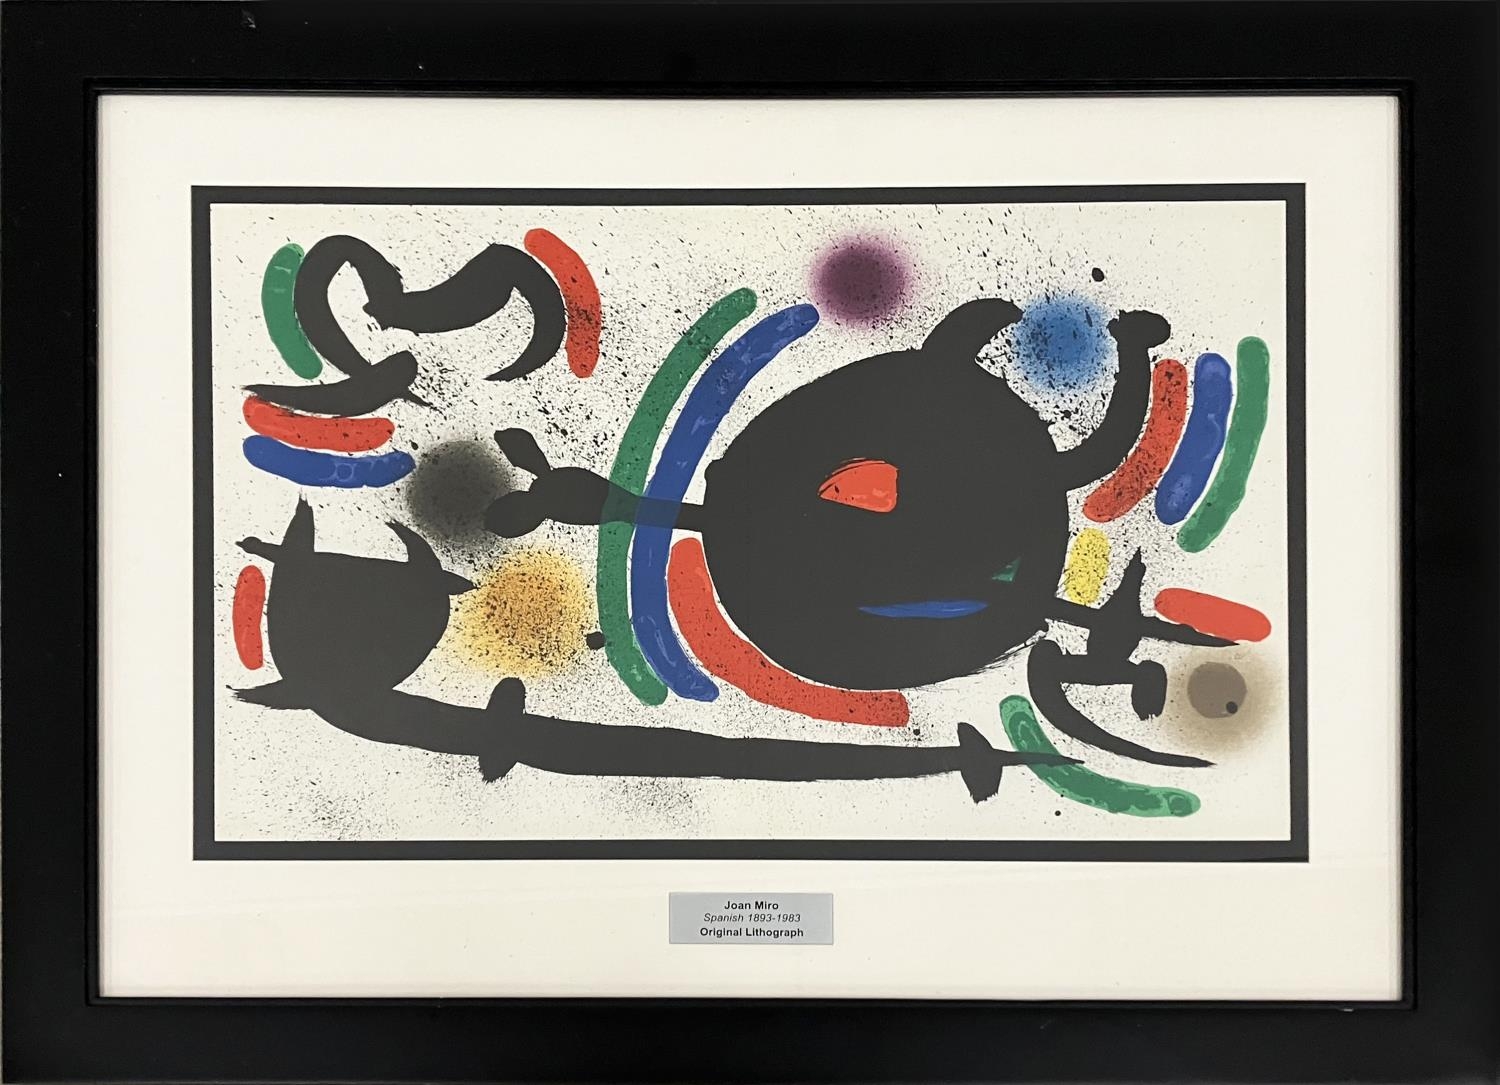 JUAN MIRO, 'Miro lithographie I, Plate XIII', lithograph, 32cm x 50cm, framed, published 1972,